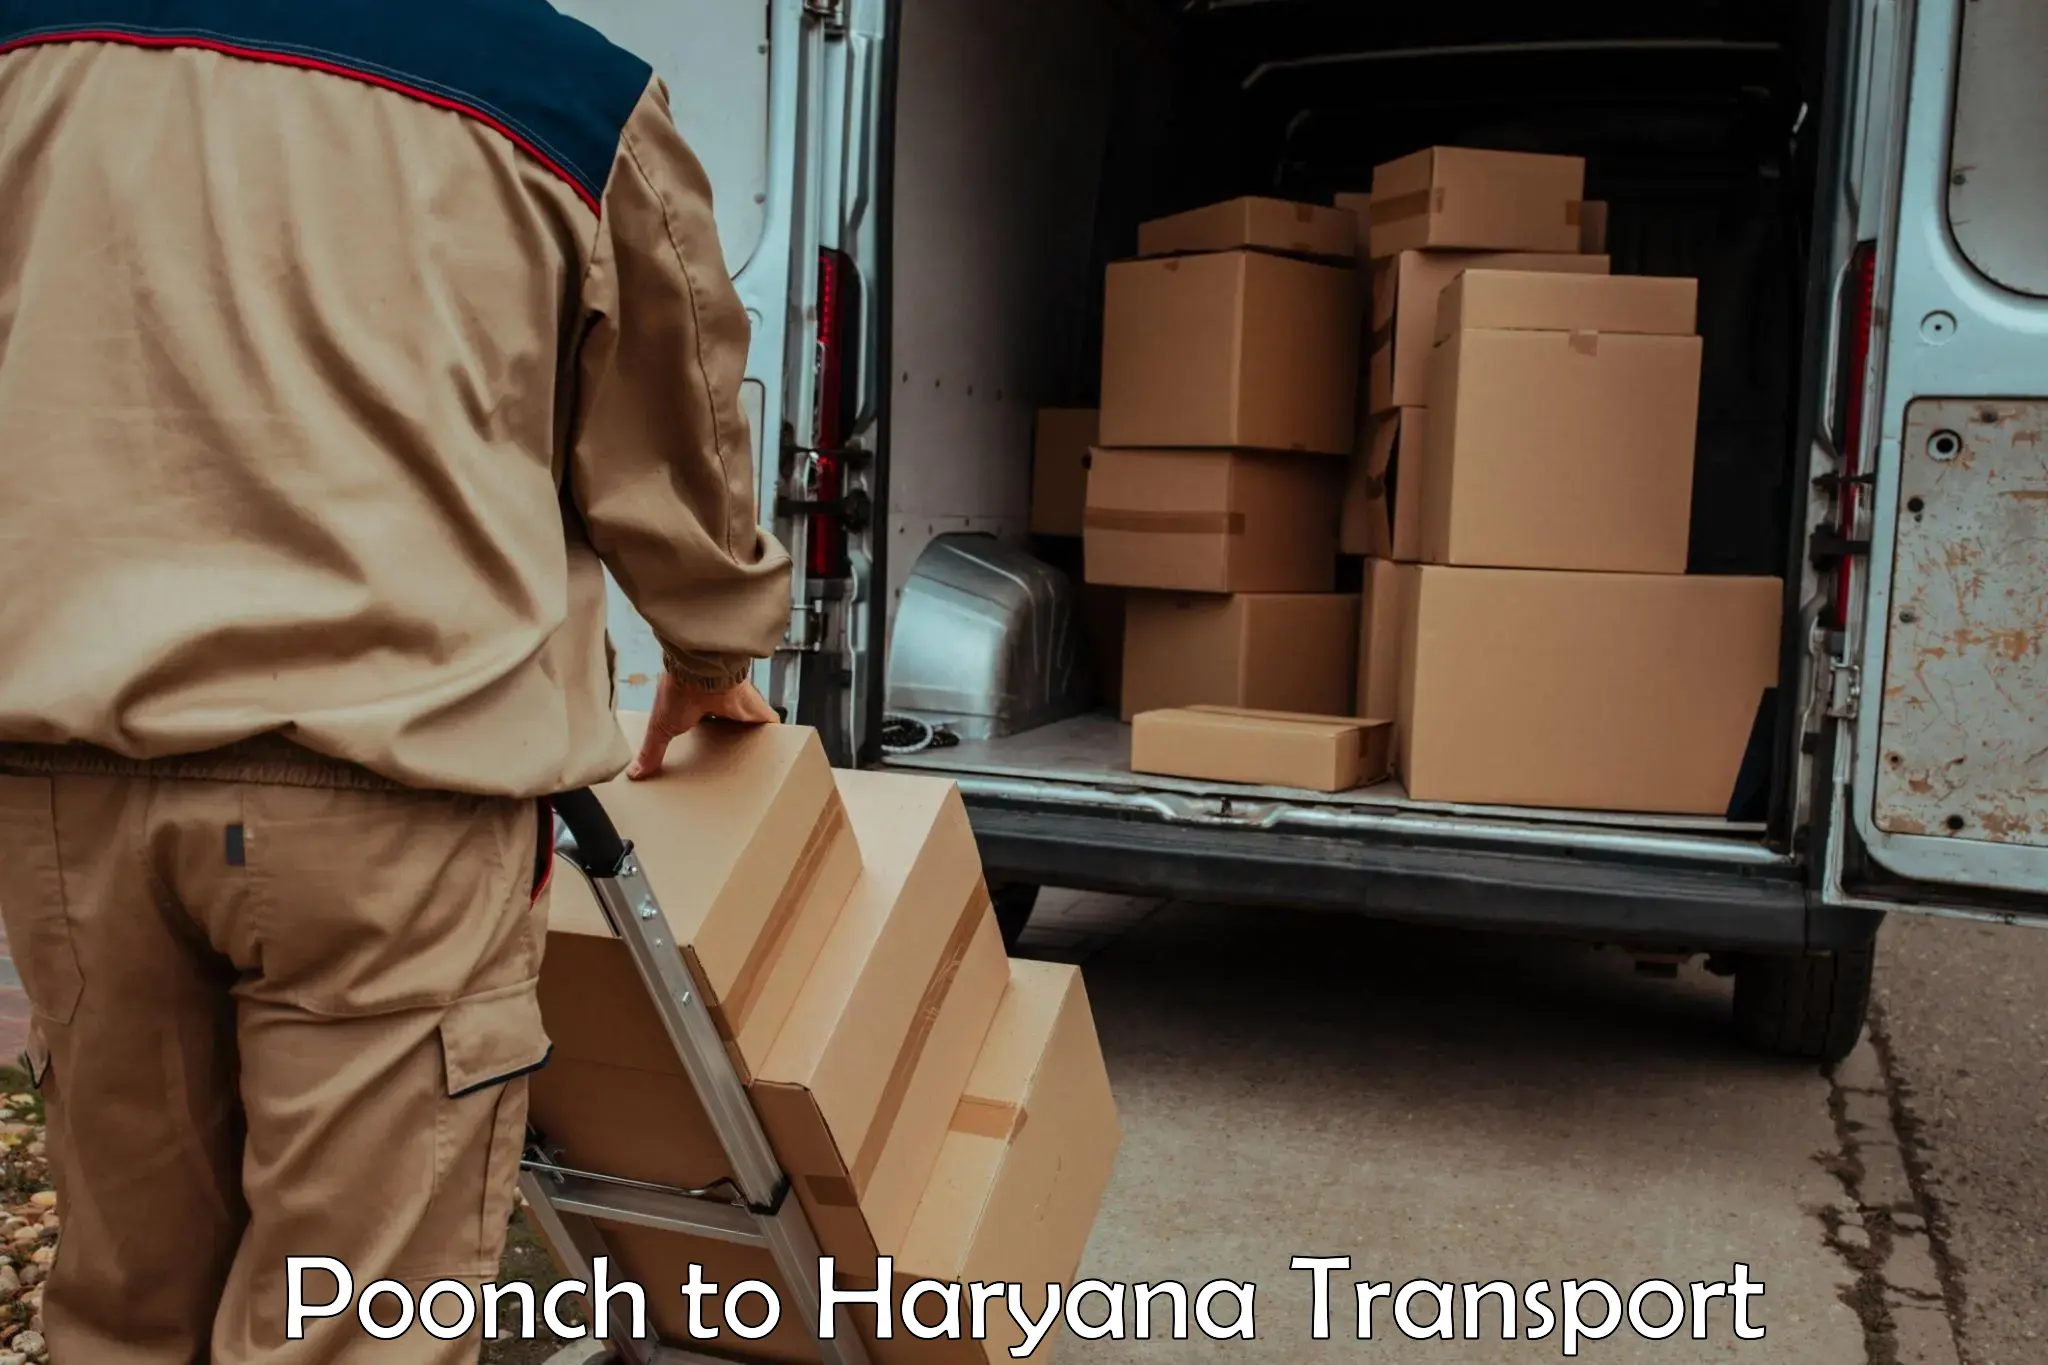 Nearby transport service Poonch to Panchkula